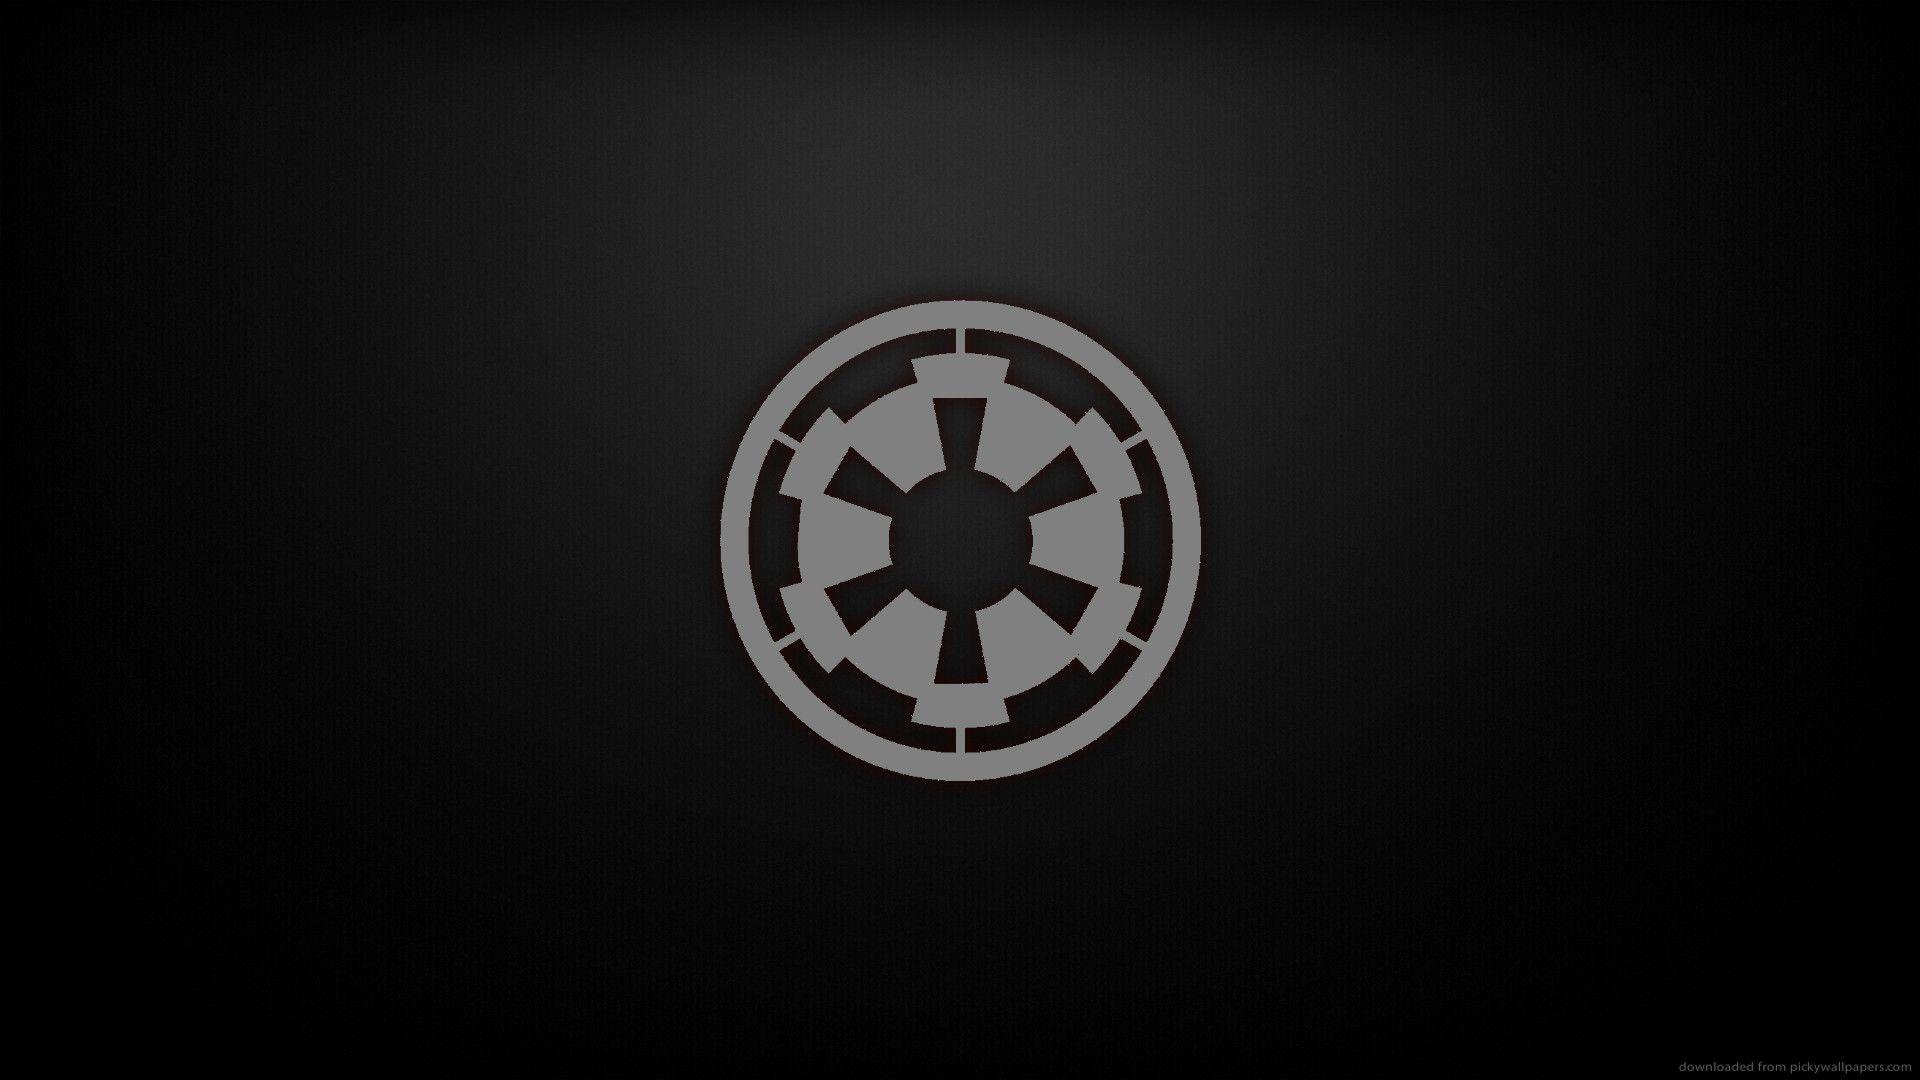 A wallpaper you guys might like. The Jedi Order emblem. I'll do a Sith one too if people want me to. [1920x1080]